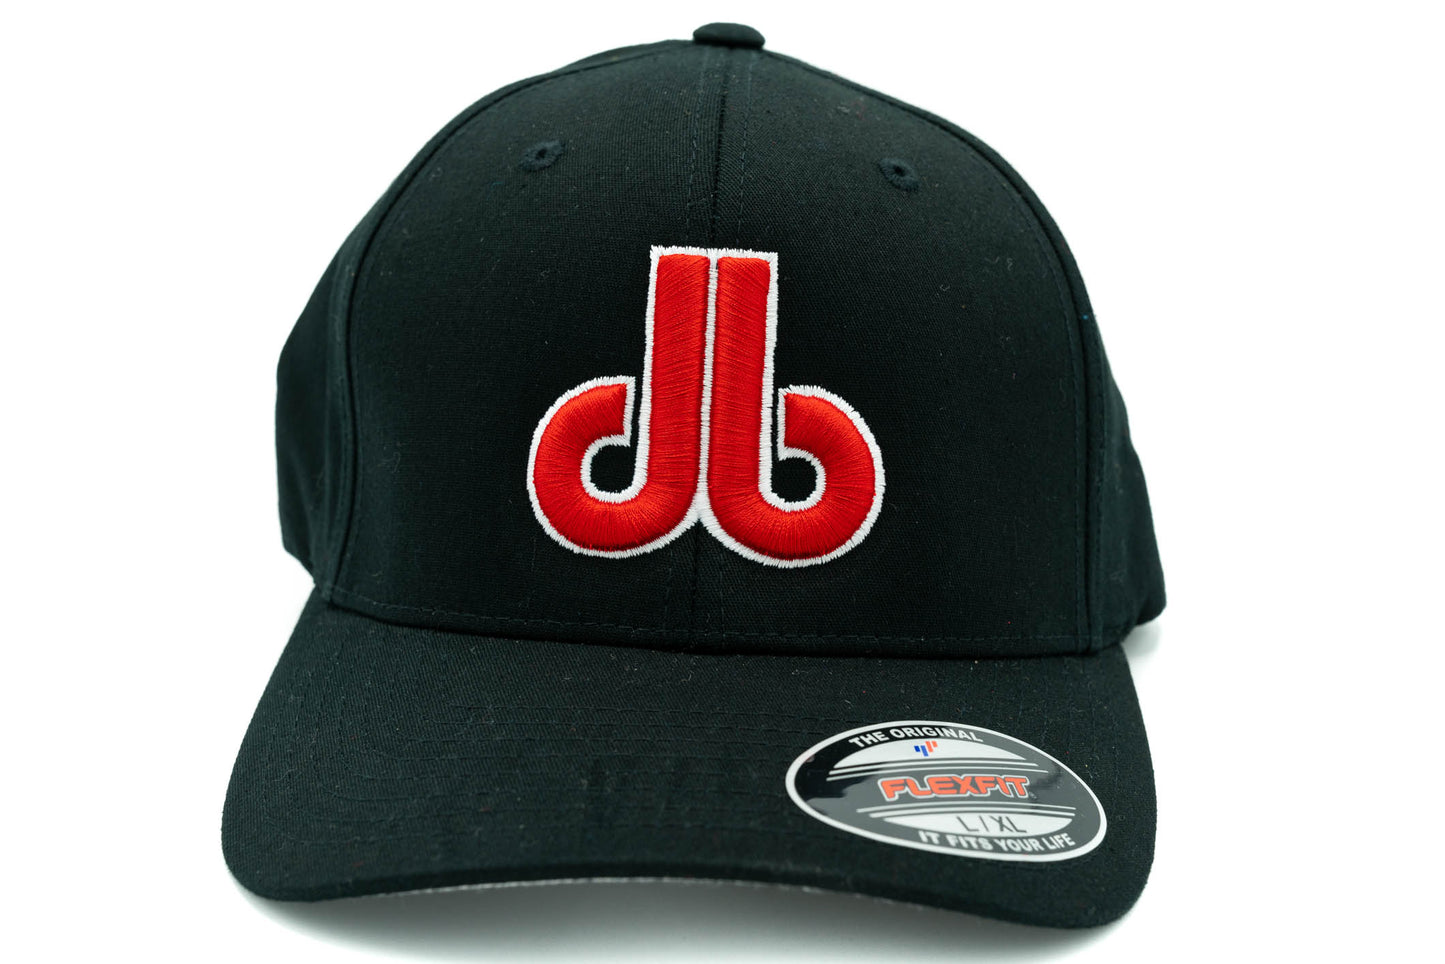 Black and Red db hat